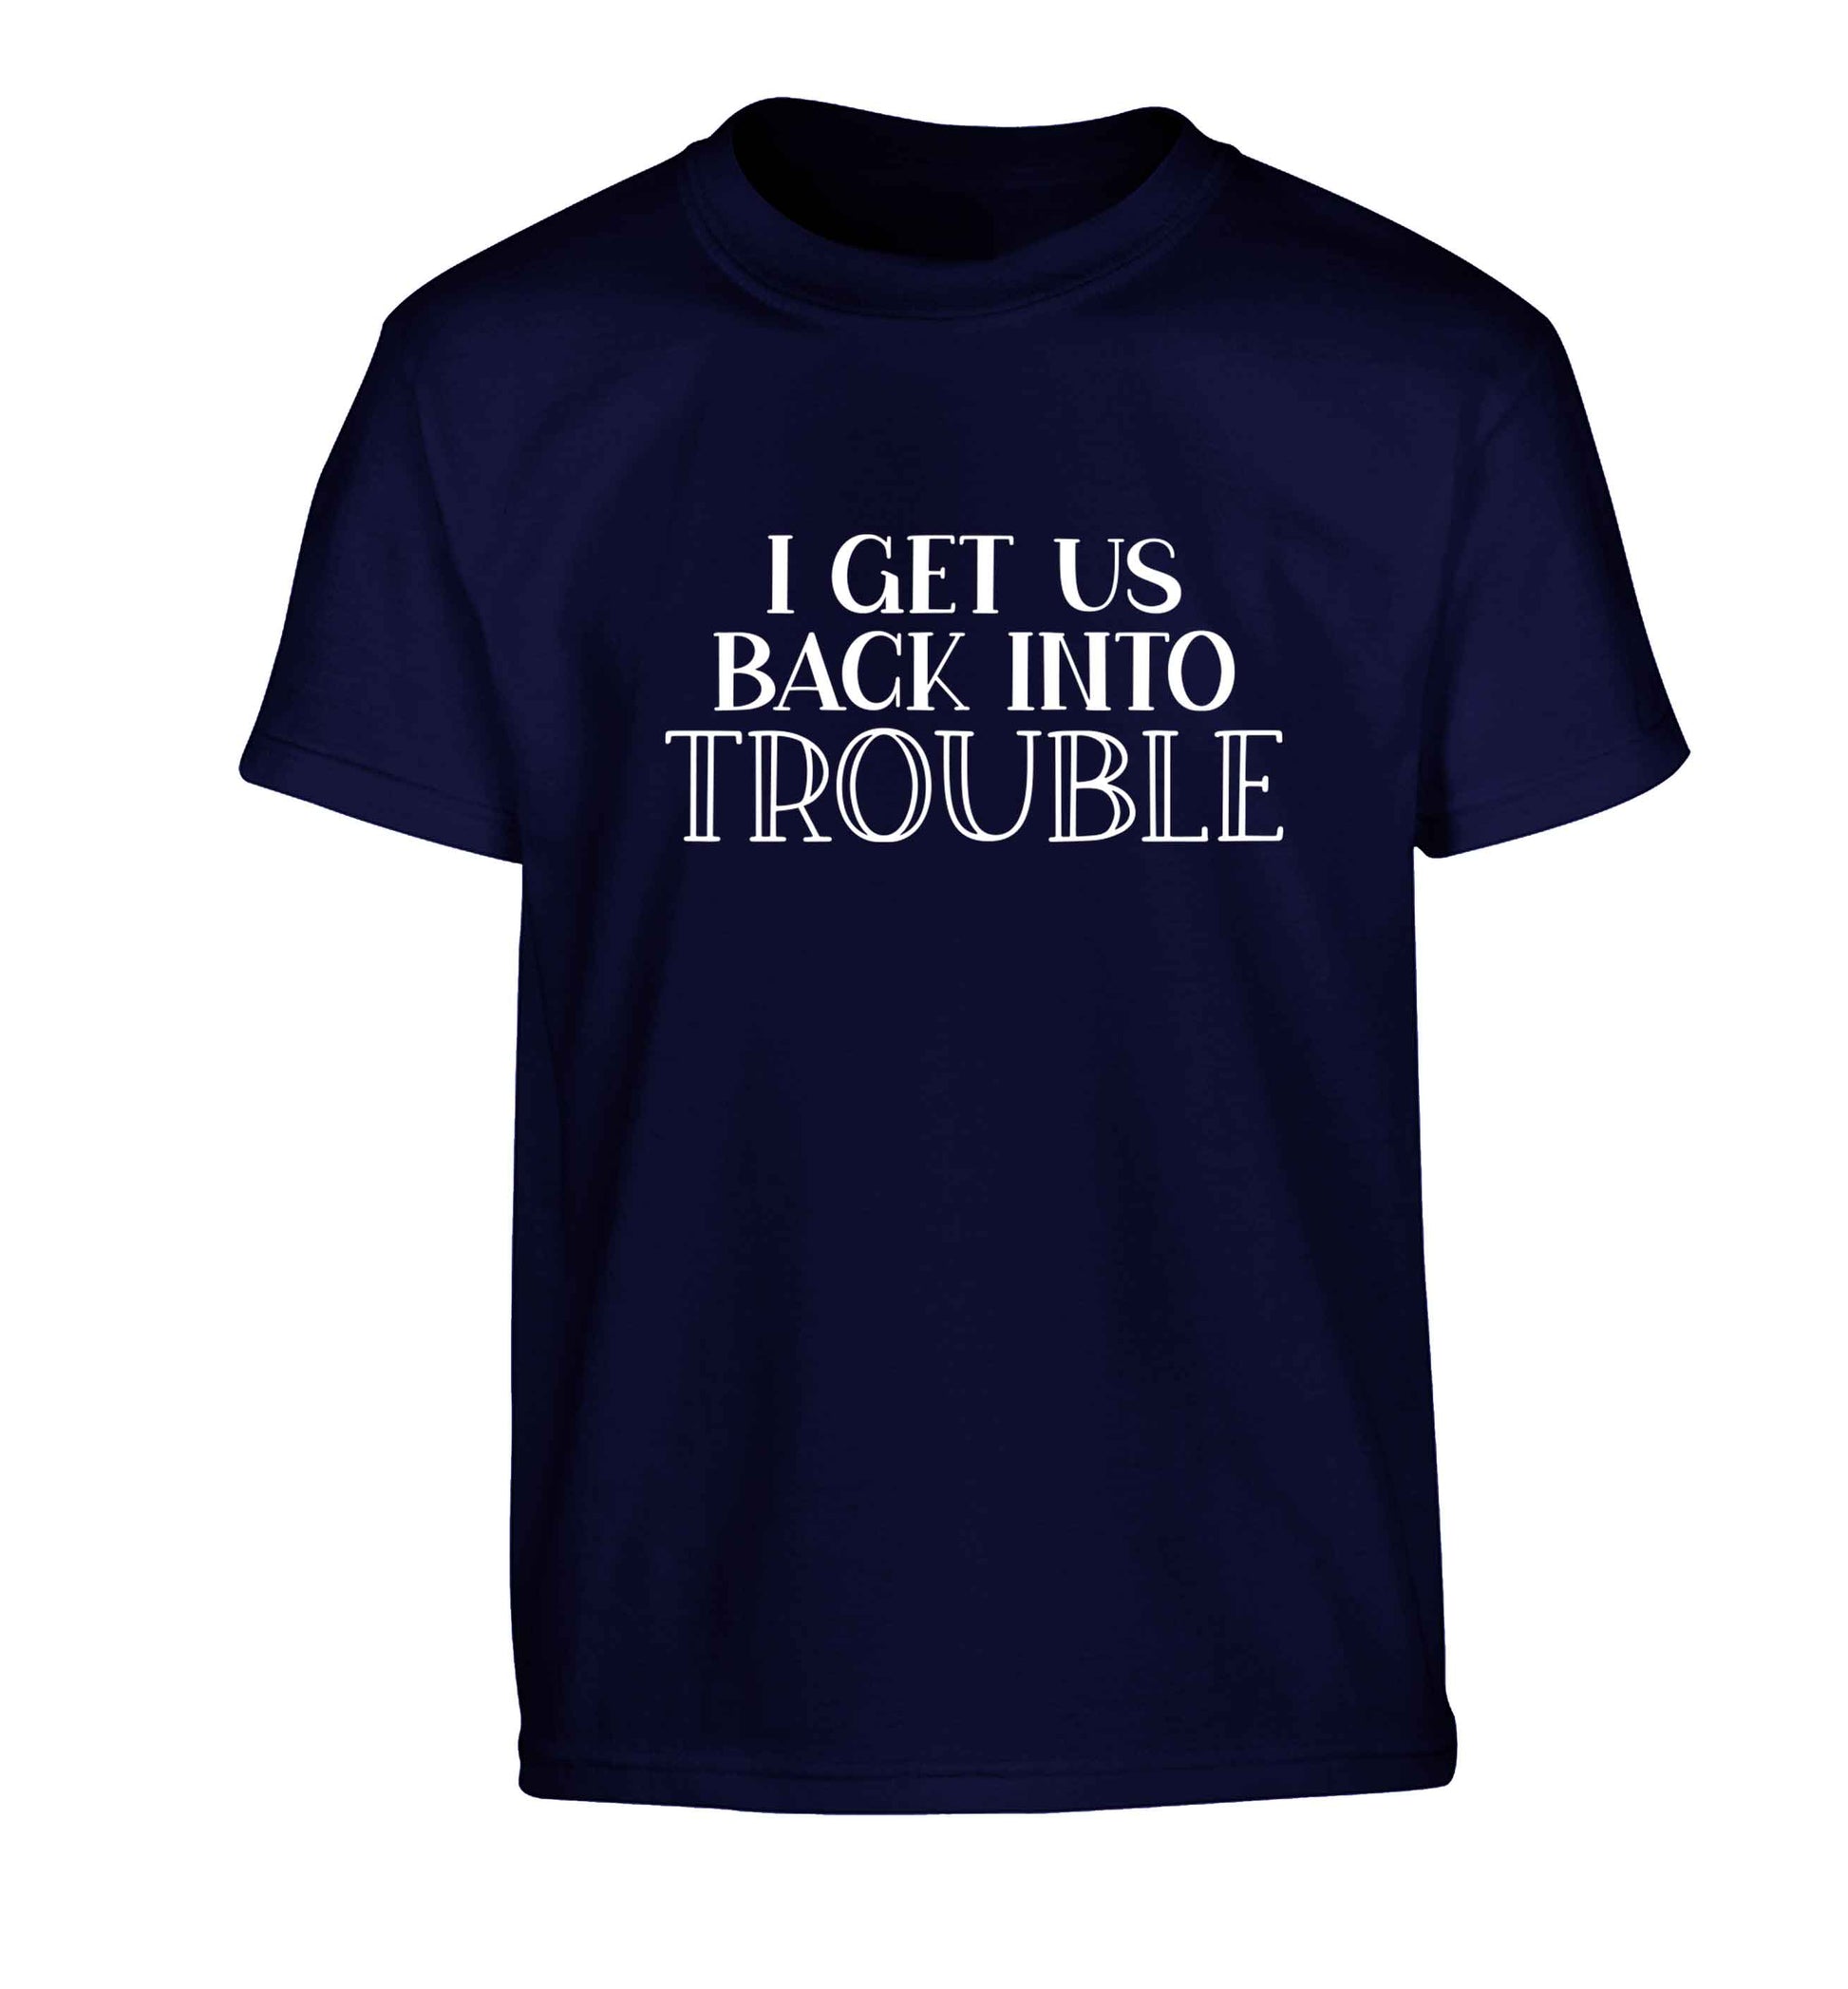 I get us back into trouble Children's navy Tshirt 12-13 Years